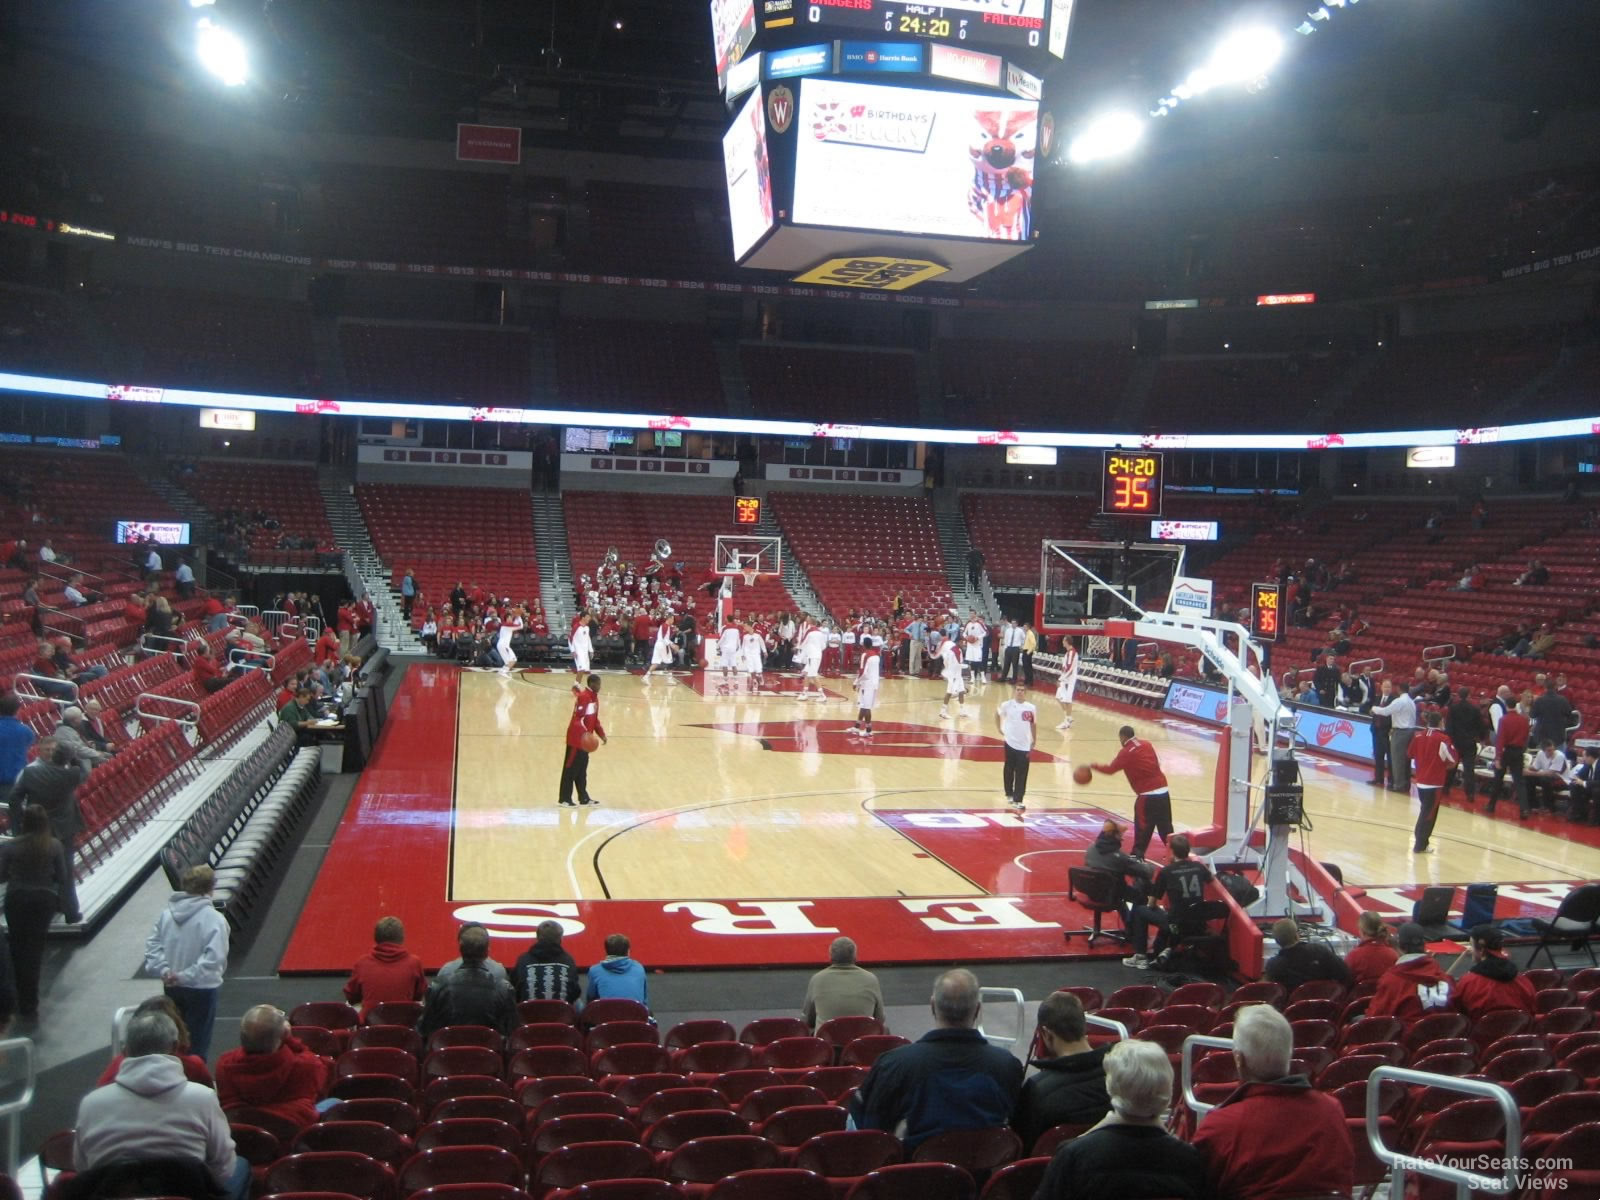 section 102 seat view  - kohl center